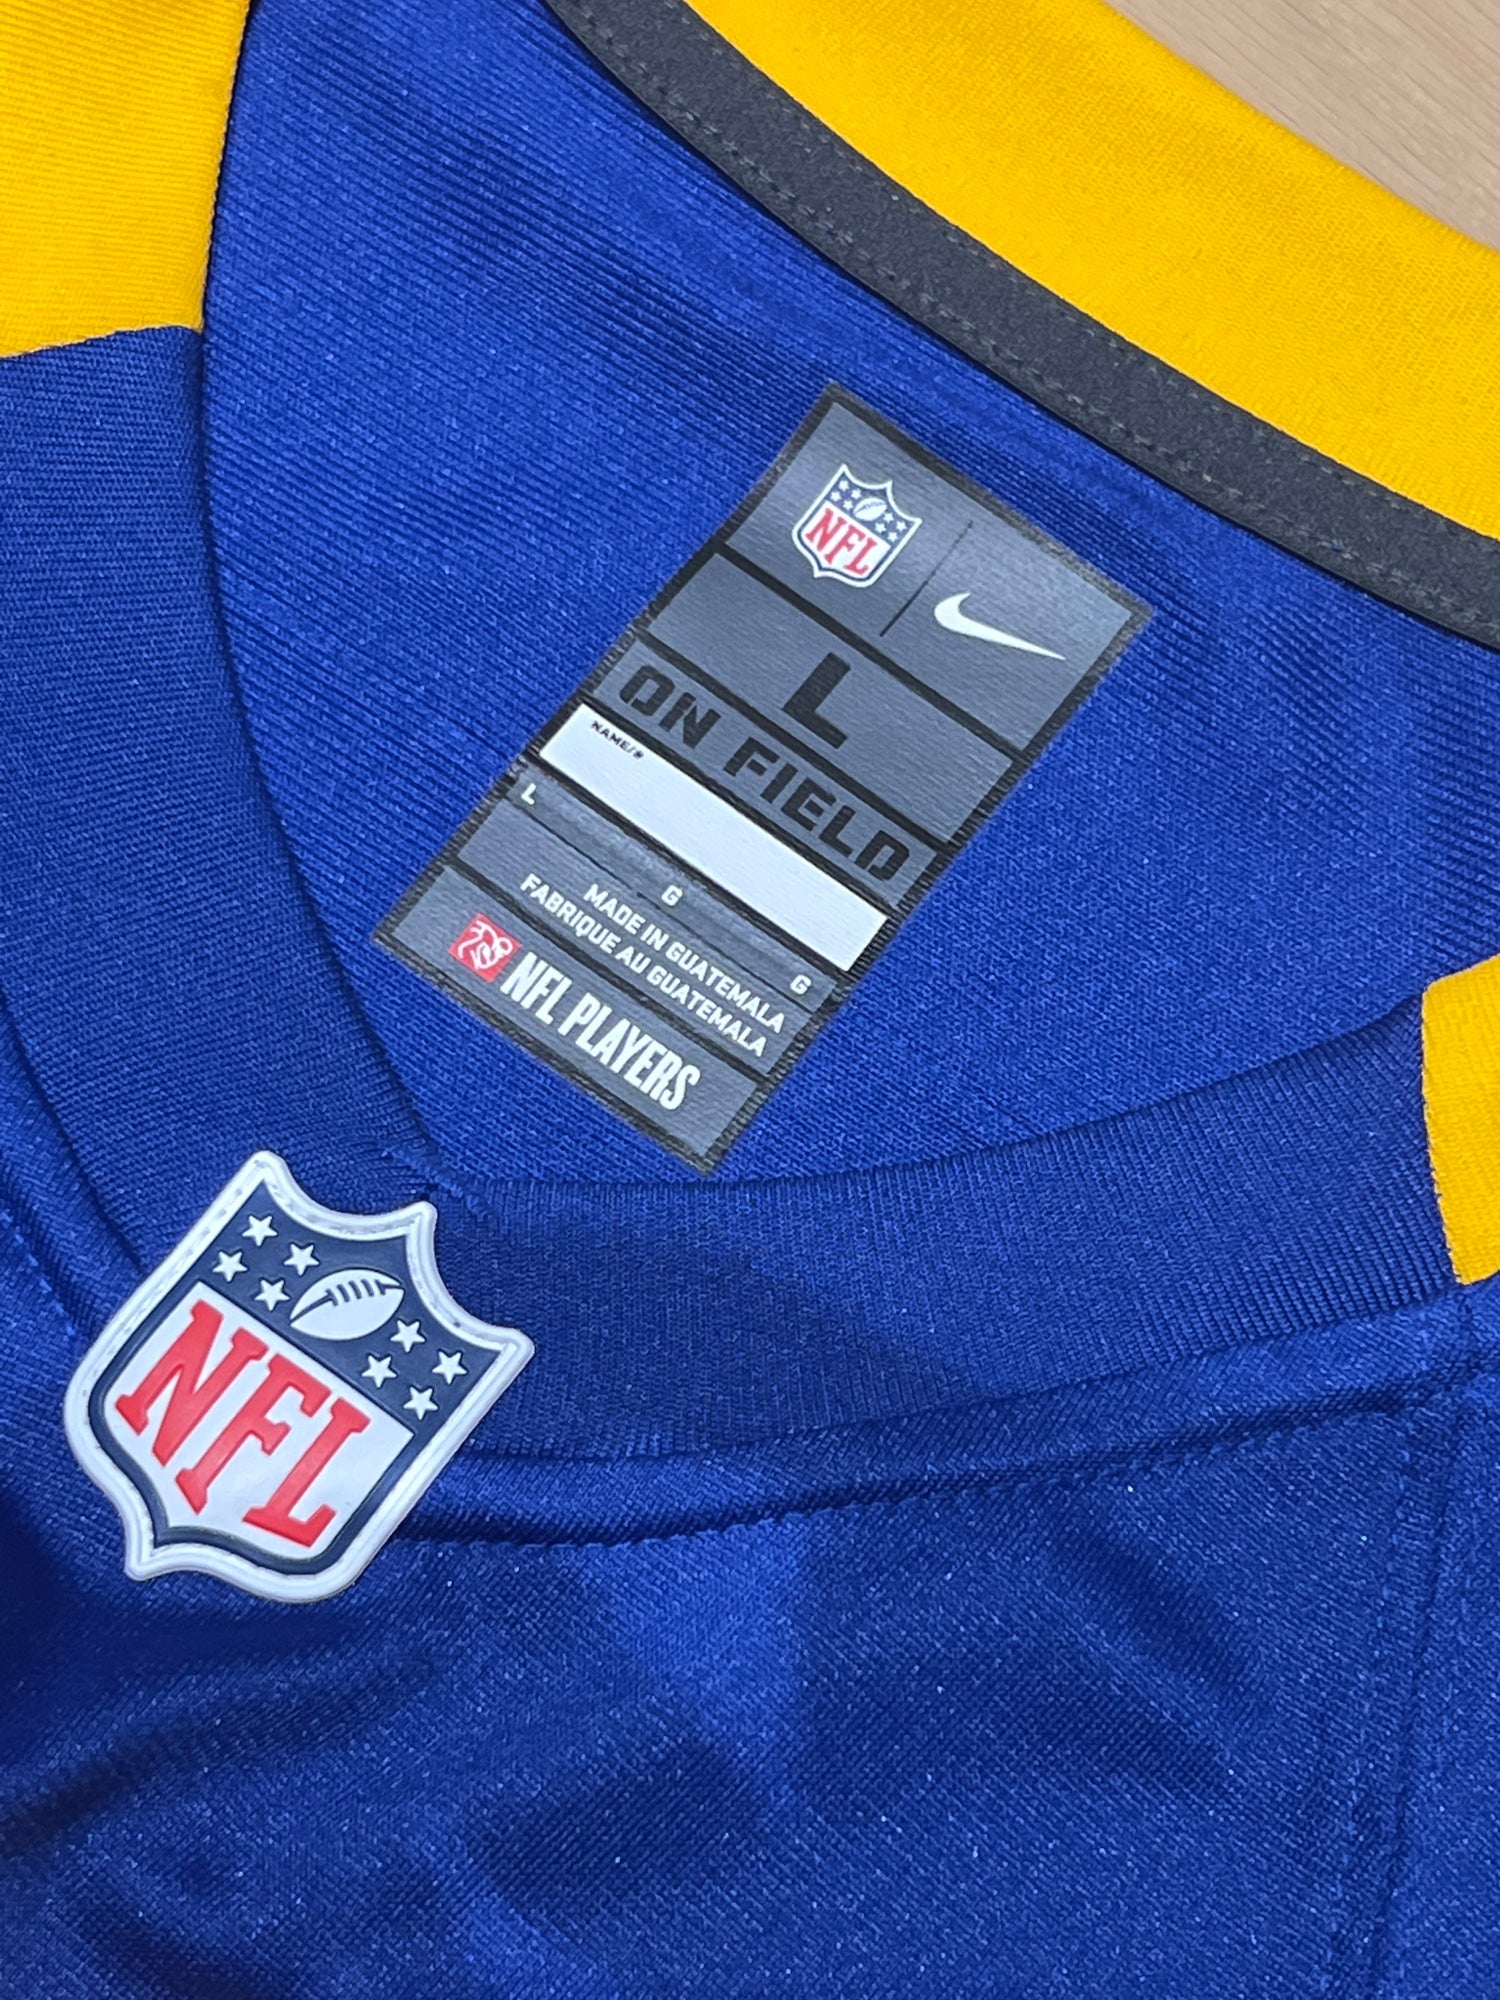 Los Angeles Rams Todd Gurley Nike NFL Authentic Jersey (Large - Blue/Gold)